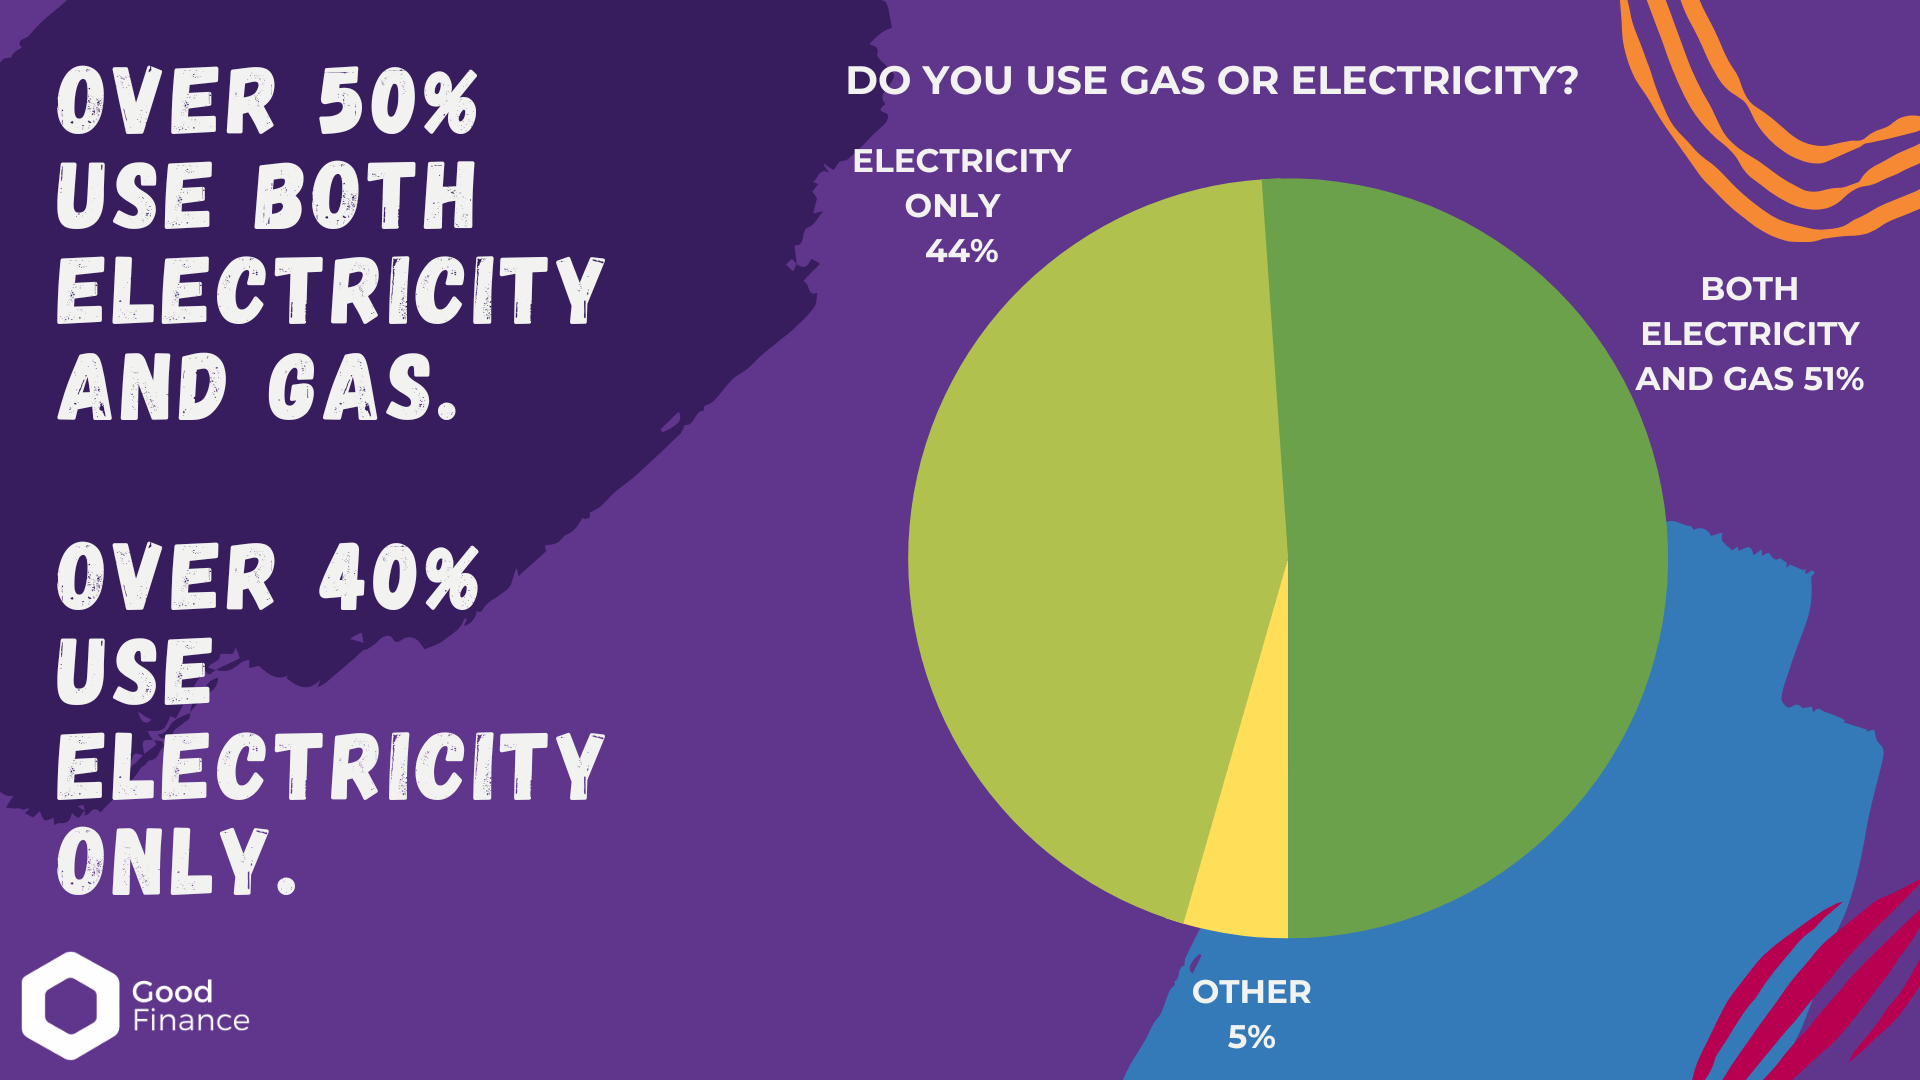 Electricy and gas versus electricity only 